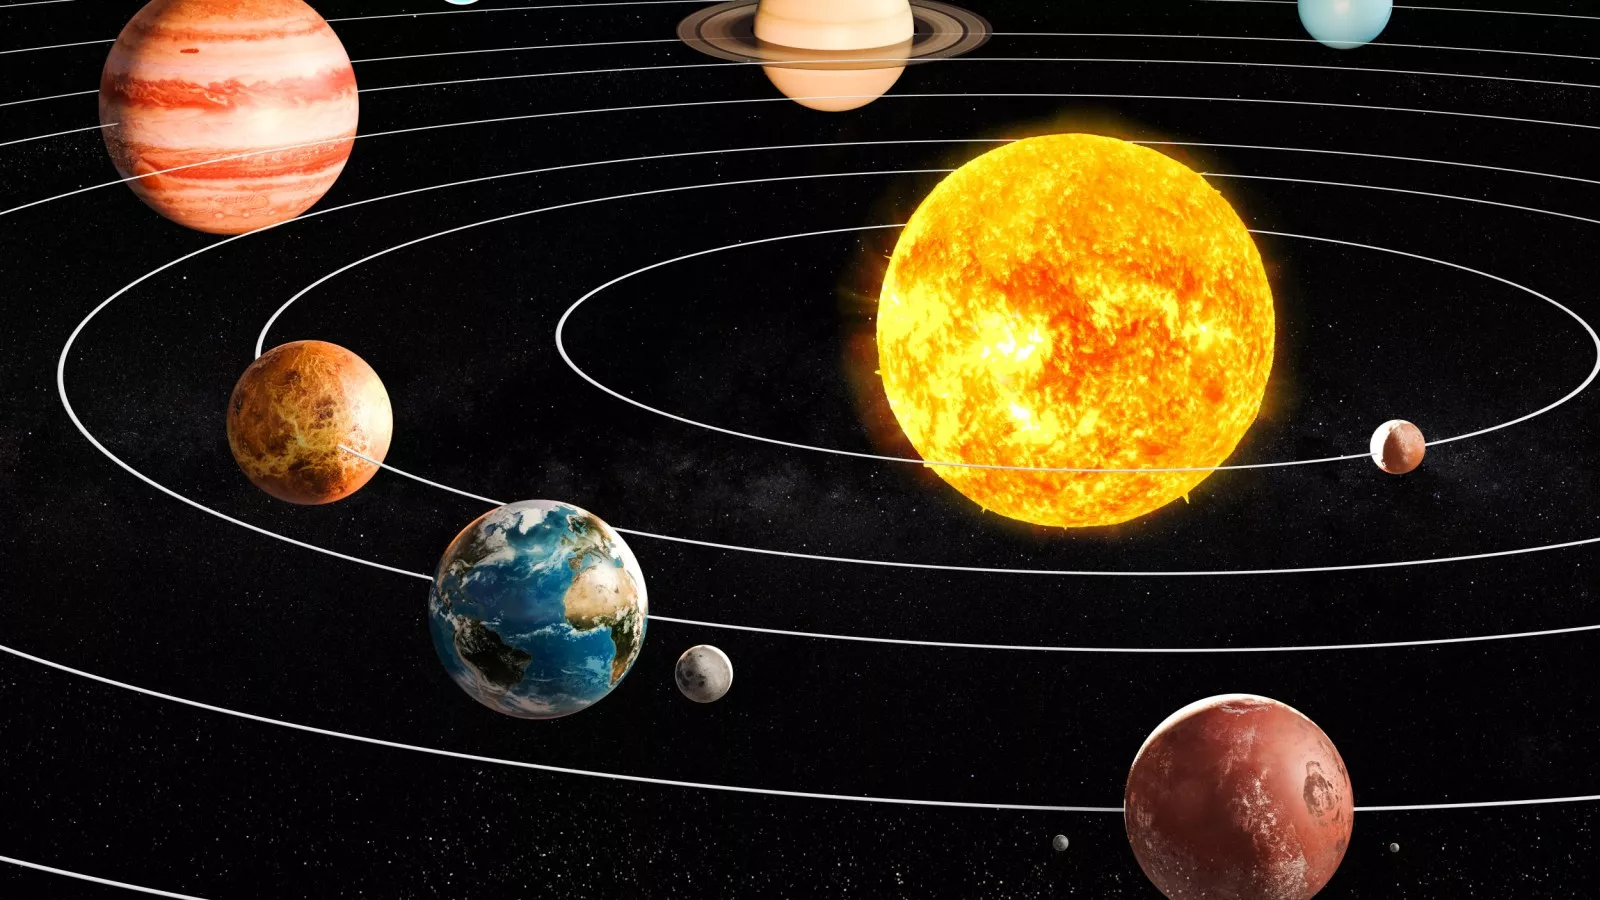 the planets in order closest to sun